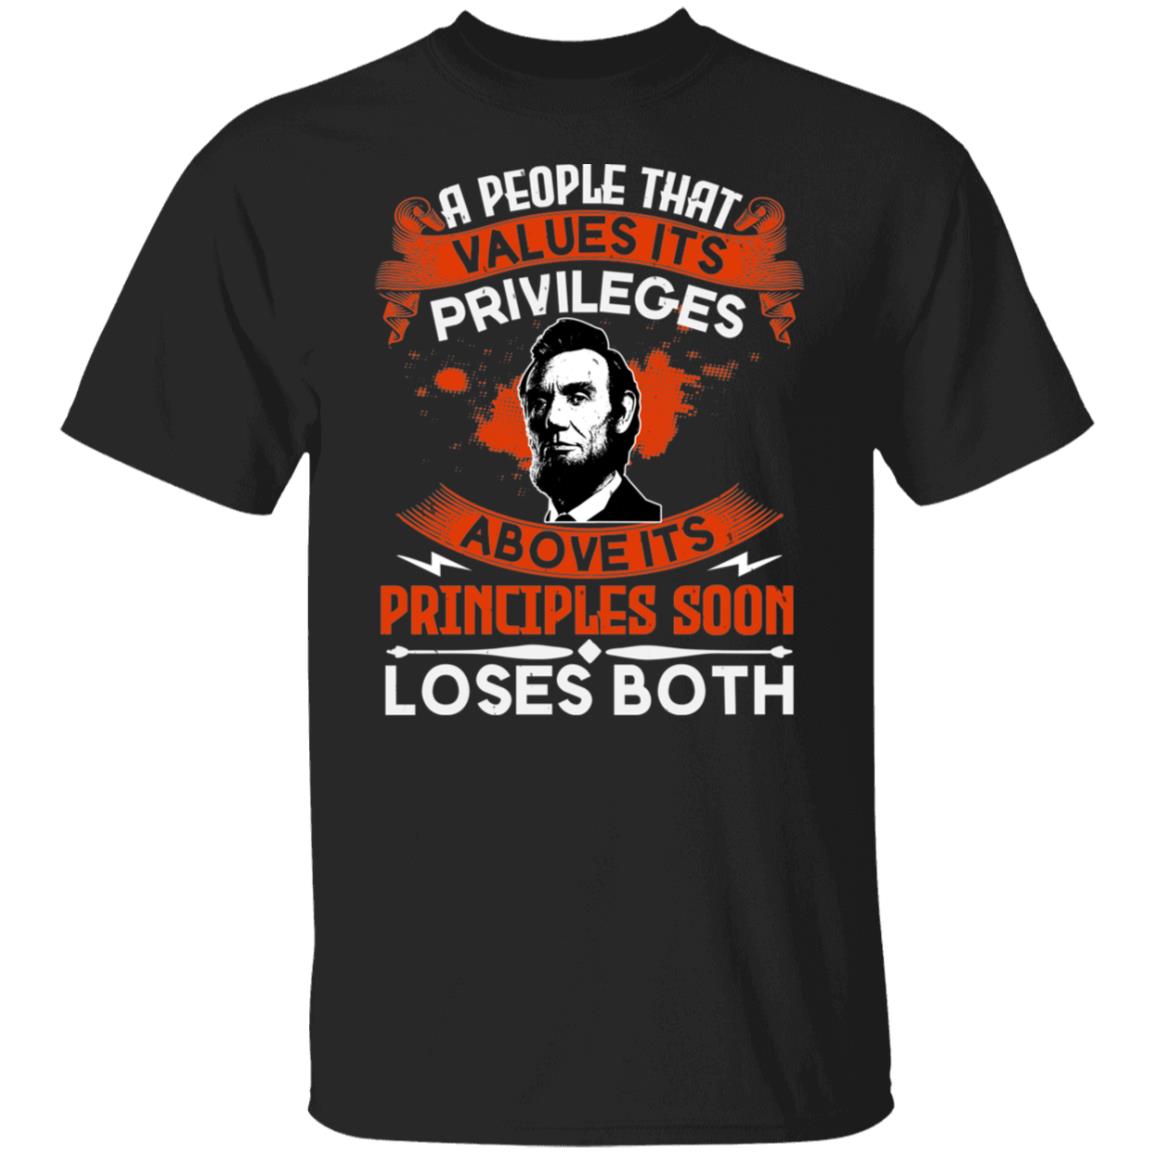 A People That Values Its Privileges Above Its Principles Soon Loses Both Shirt Also available : Long Sleeve, Hoodie, Tank